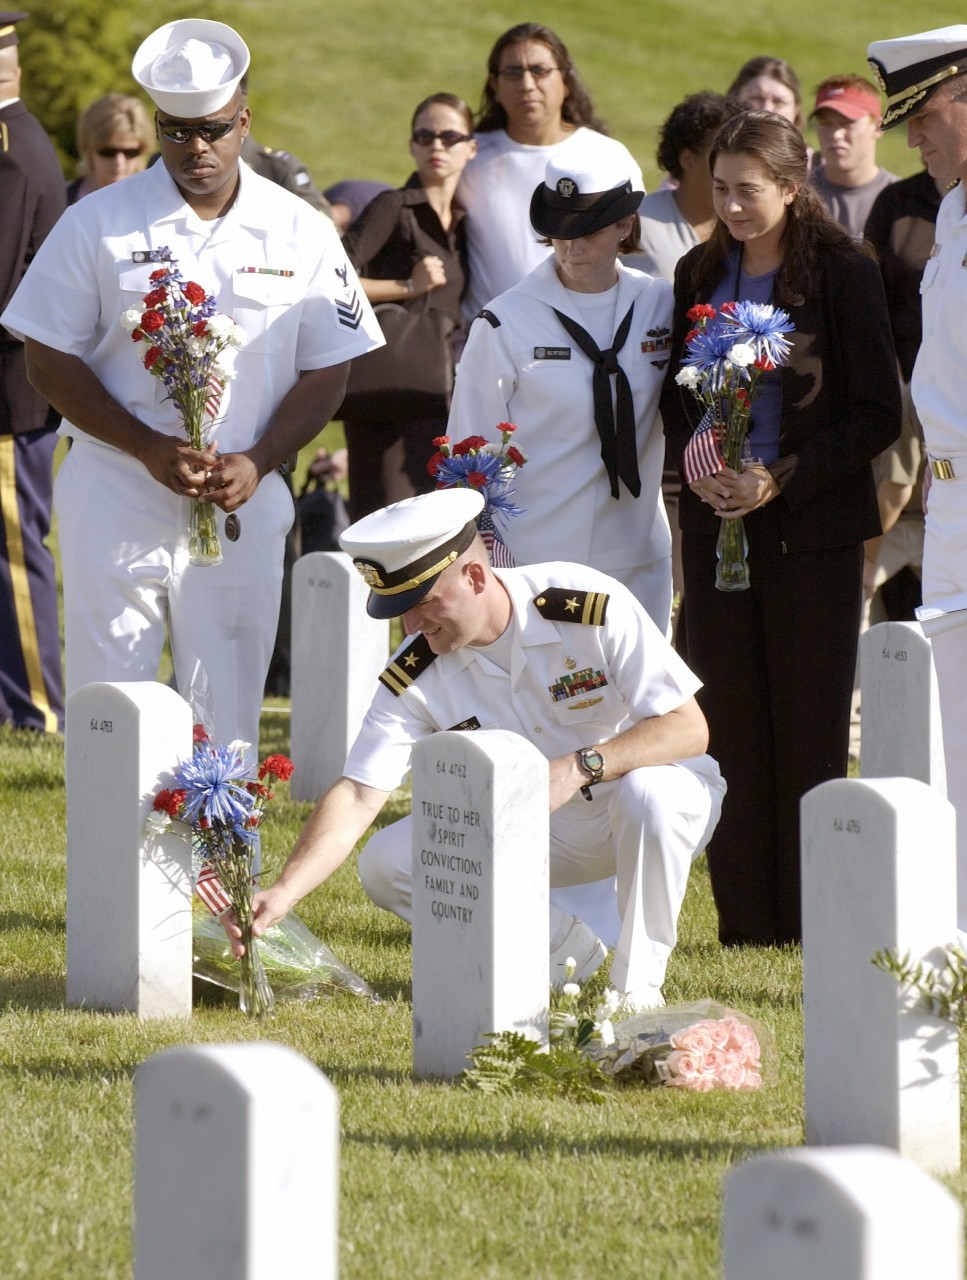 A U.S. Navy lieutenant dropped to one knee and placed flowers on a gravesite